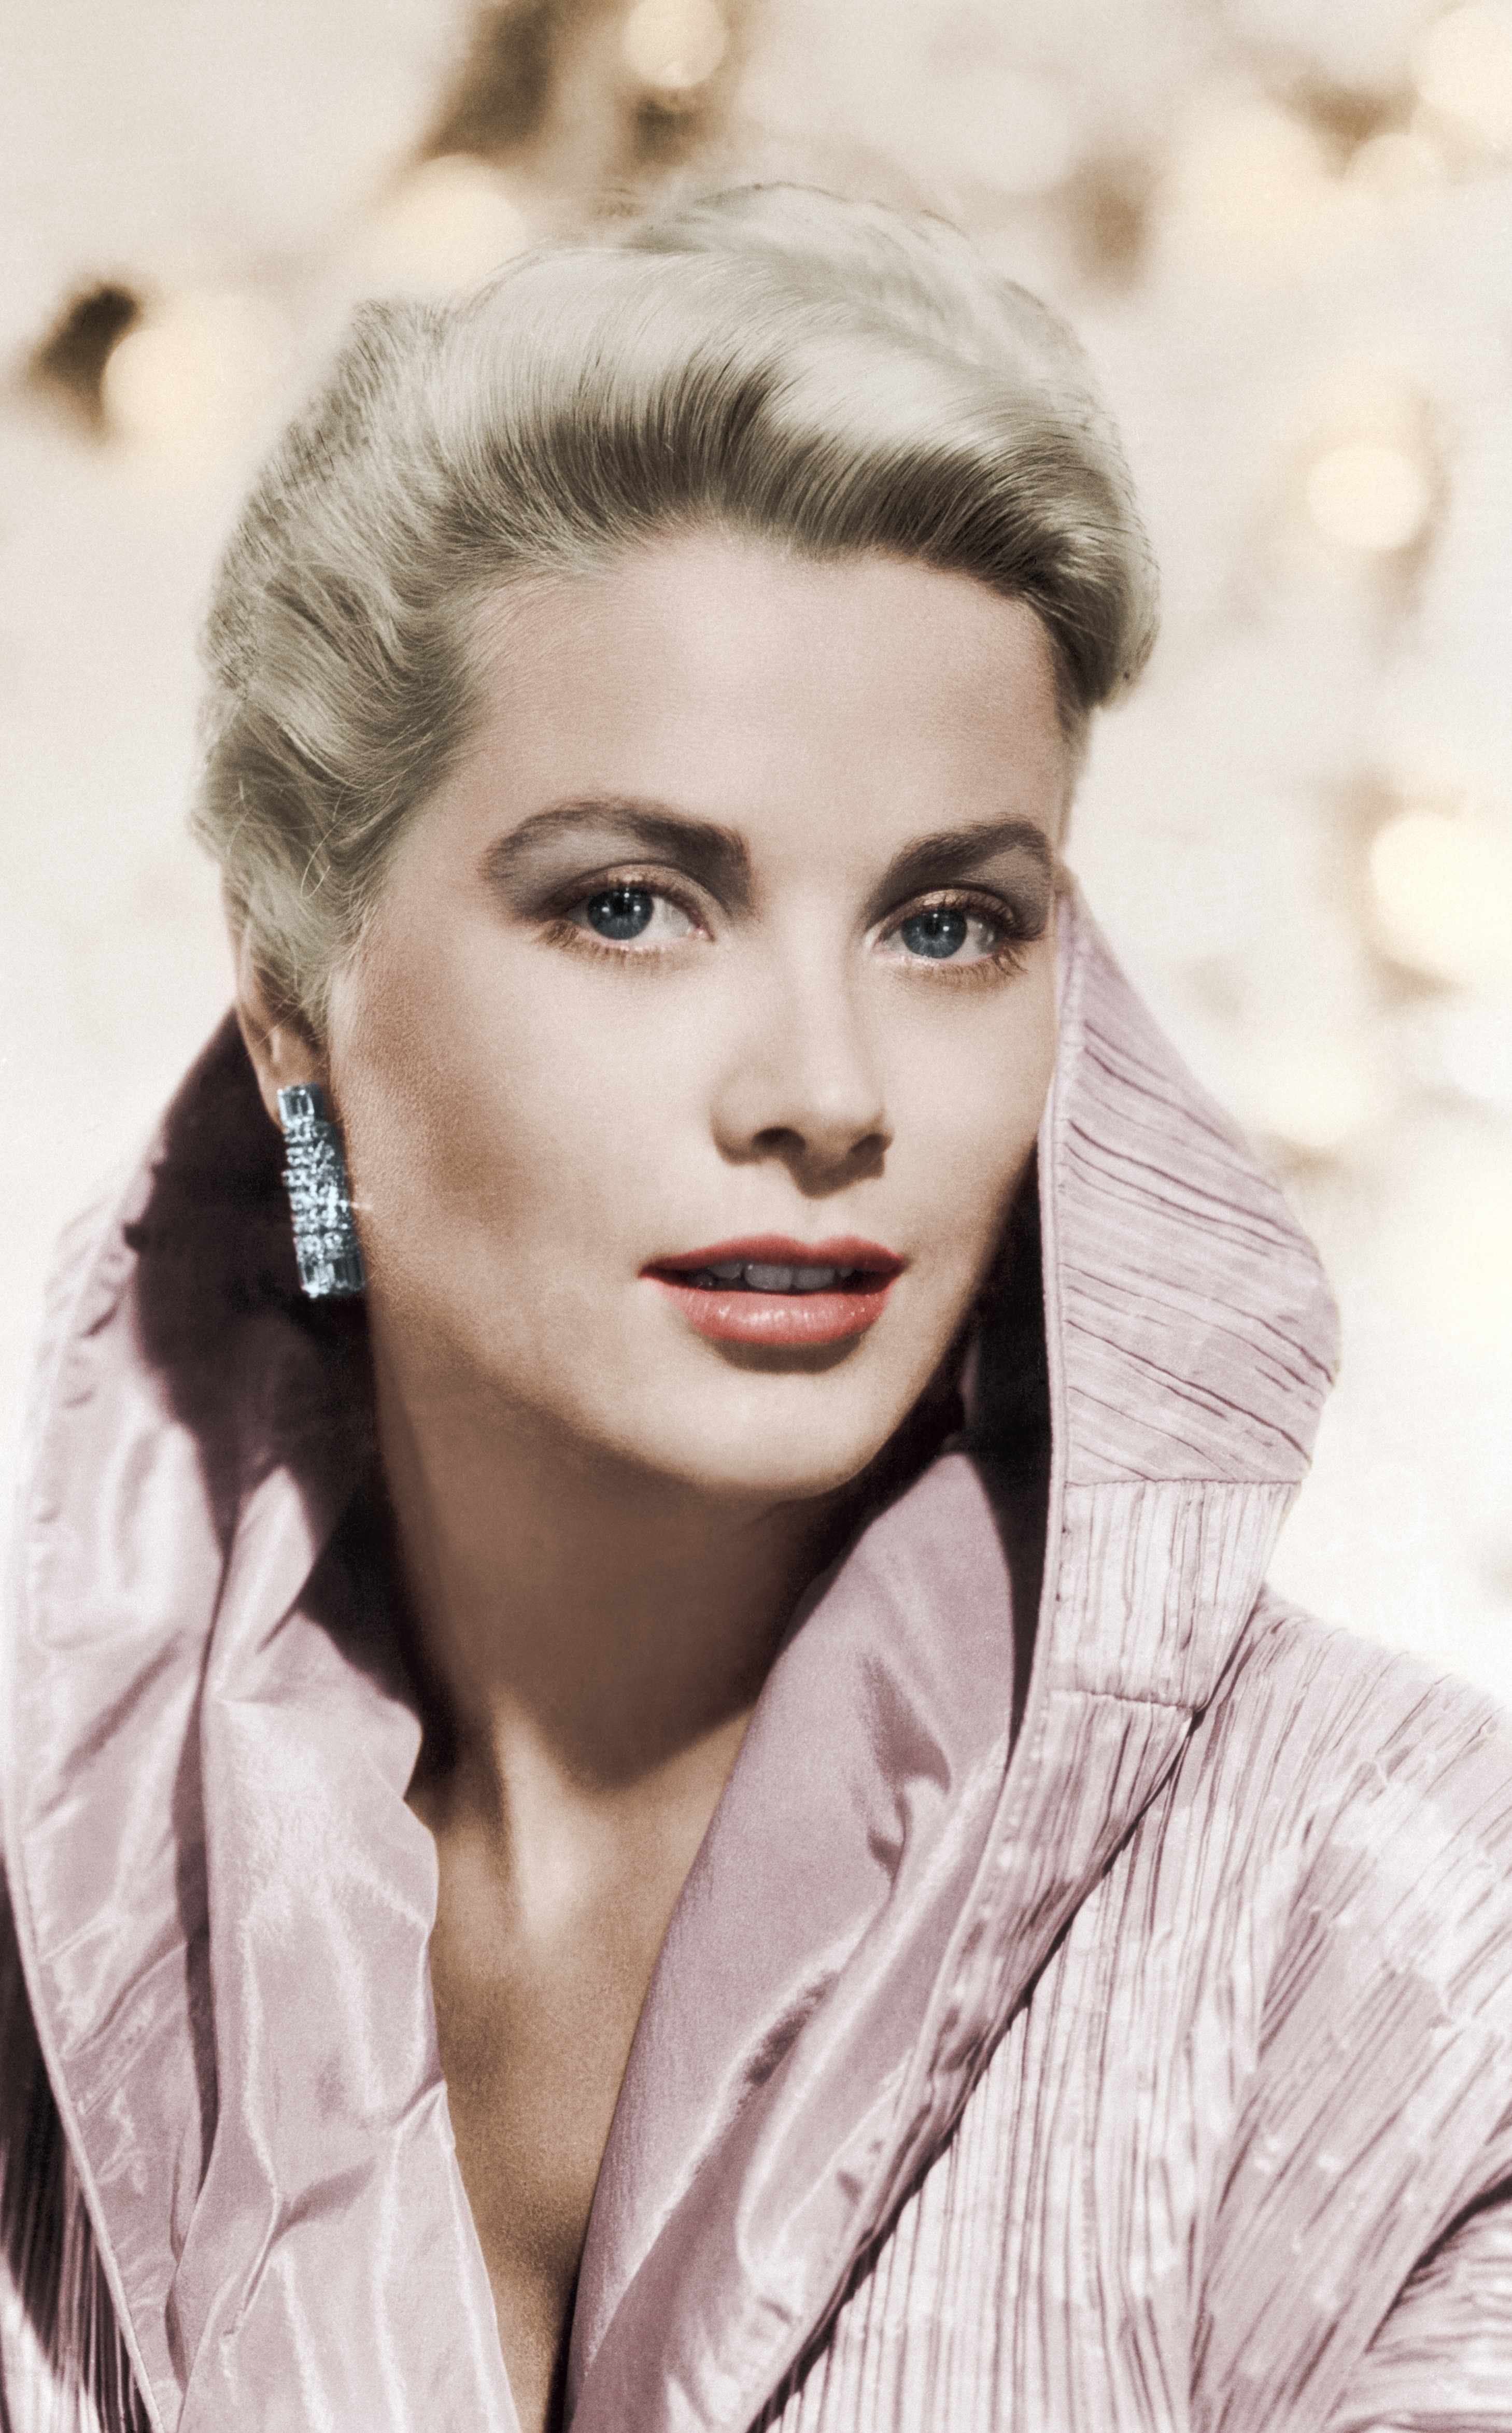 Grace Kelly photographed on January 1, 1950  | Source: Getty Images